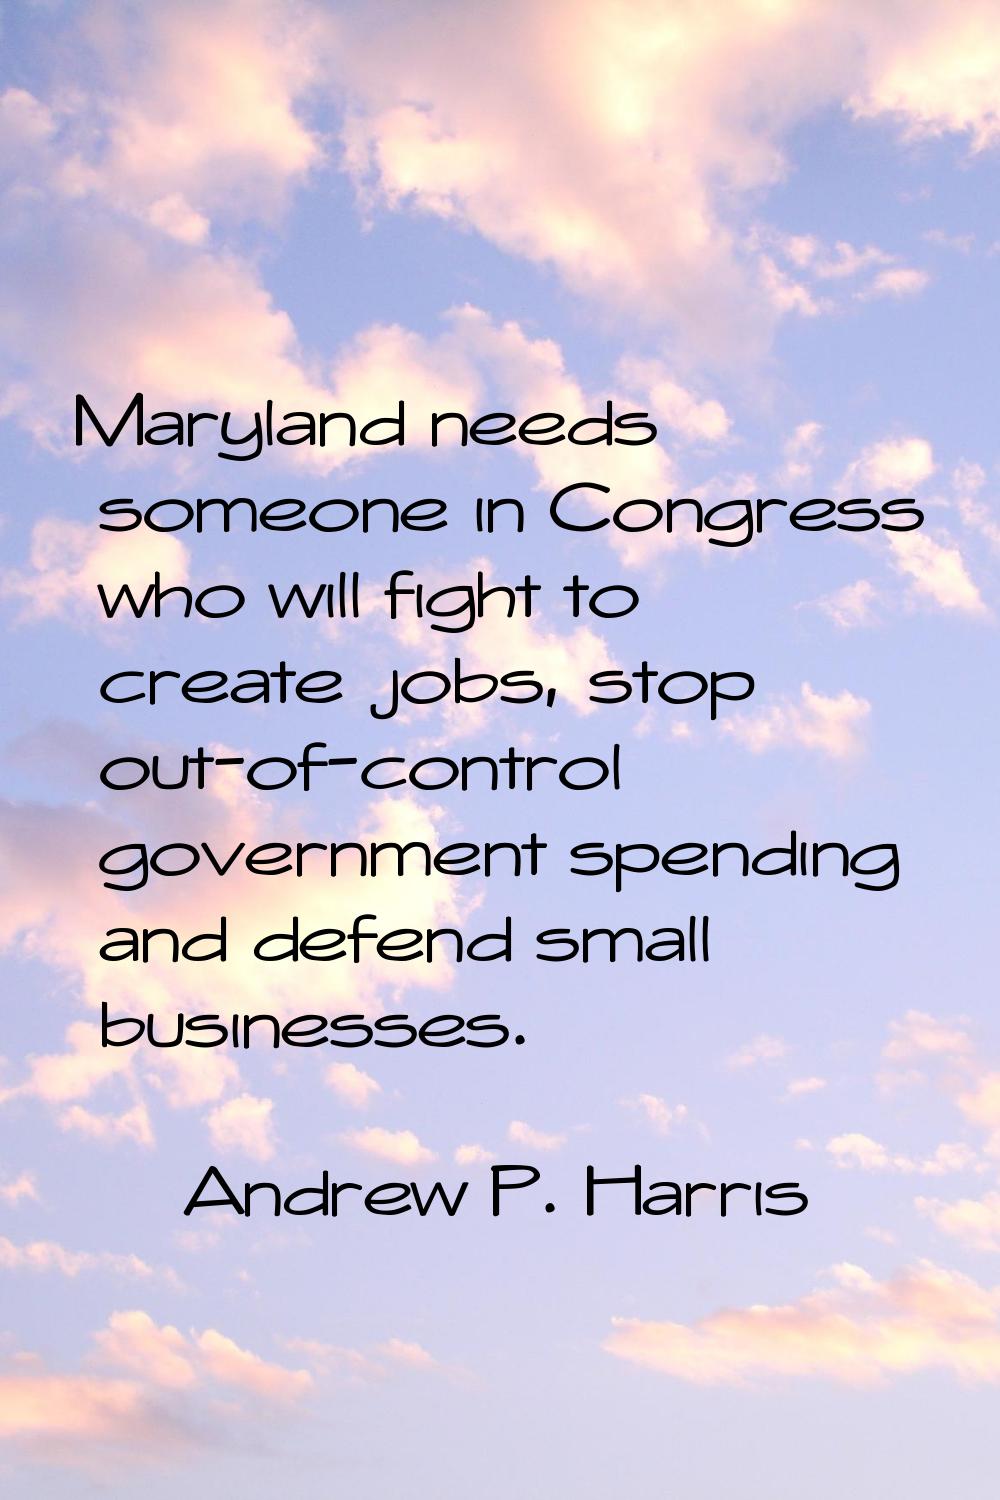 Maryland needs someone in Congress who will fight to create jobs, stop out-of-control government sp